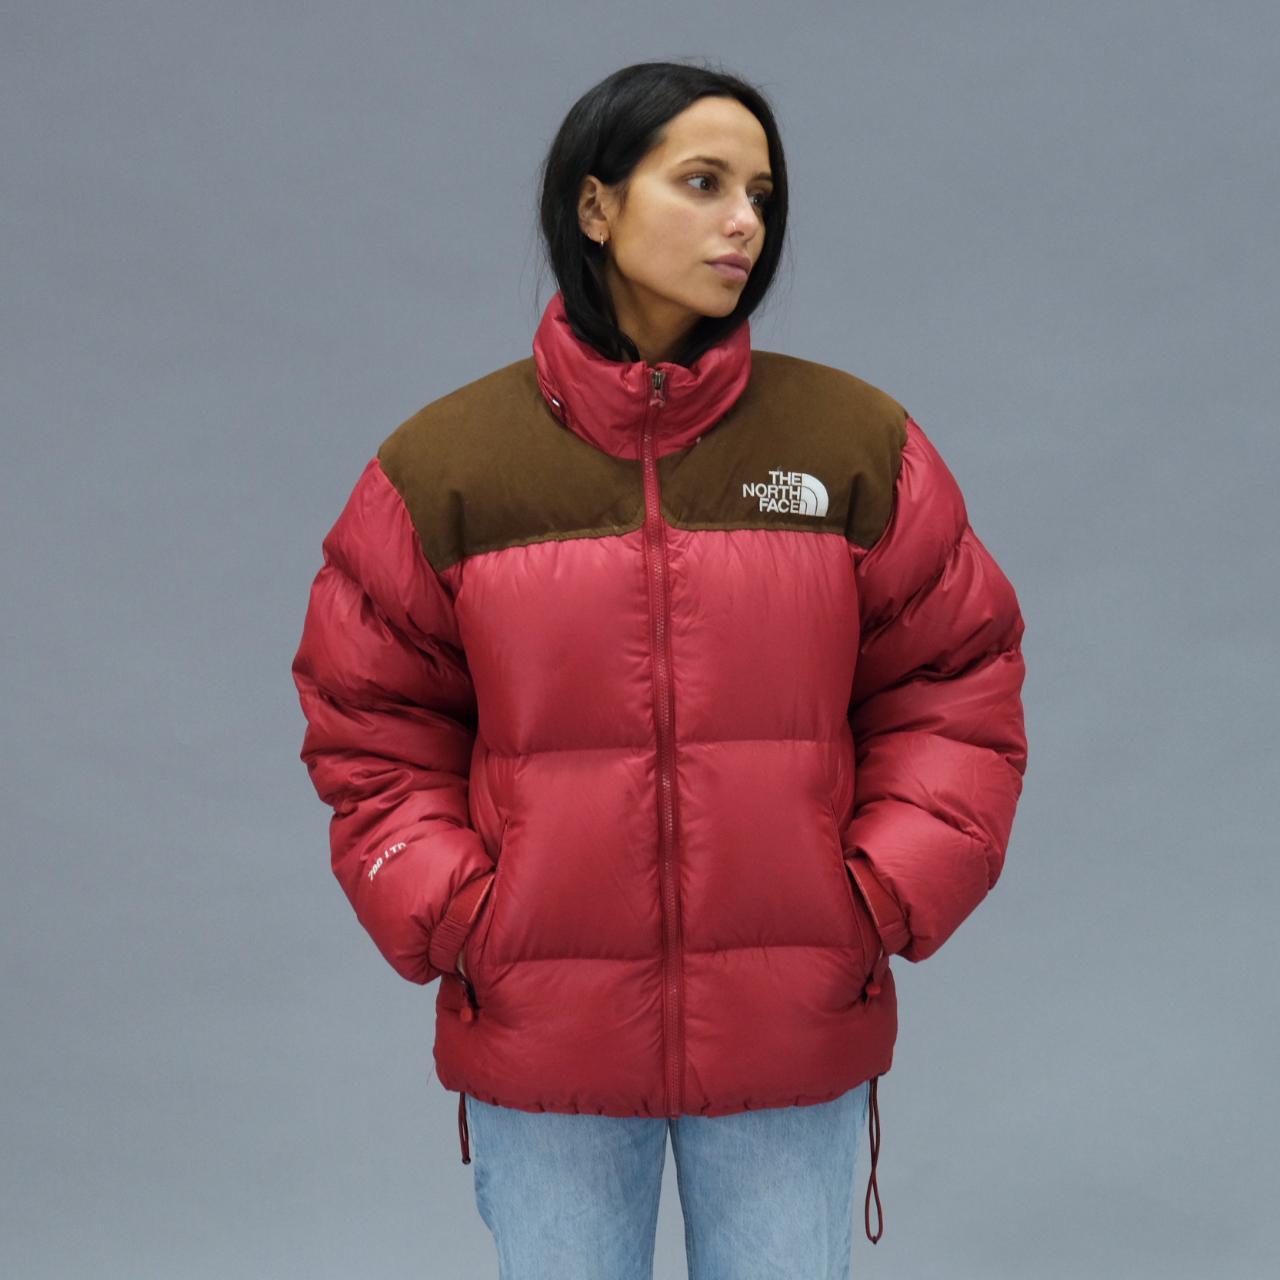 The North Face Puffer Jacket in Red and Brown. ... - Depop